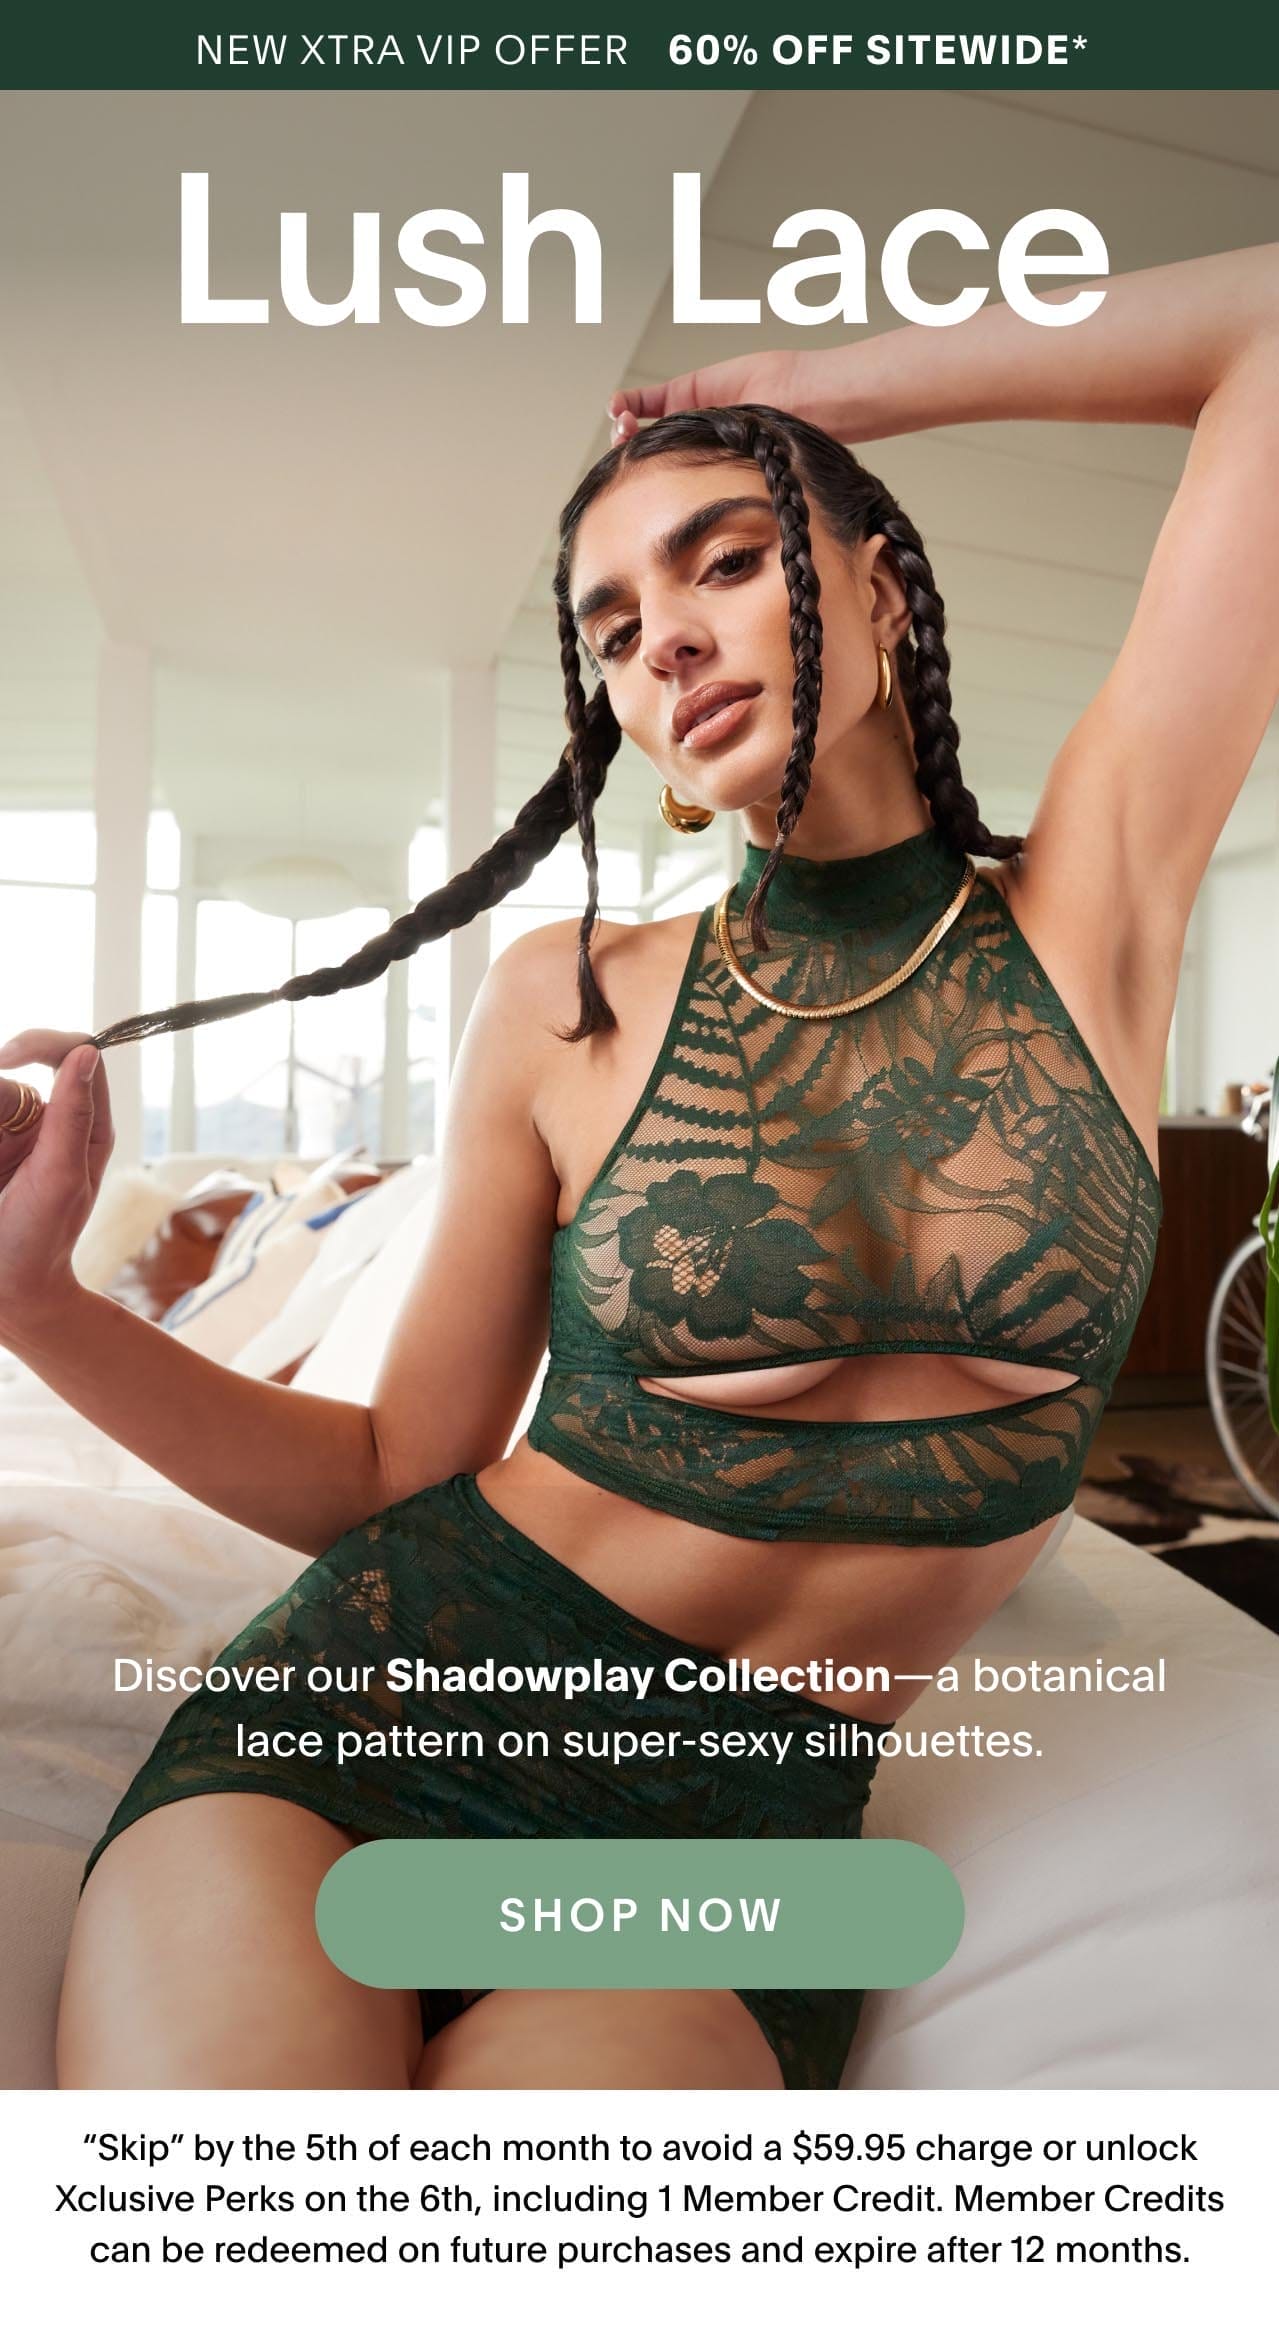 New Xtra VIP Offer 60% OFF Sitewide* Lush Lace New Xtra VIP Members: Unlock Xclusive access to Discover our Shadowplay Collection—a botanical lace pattern on super-sexy silhouettes. 